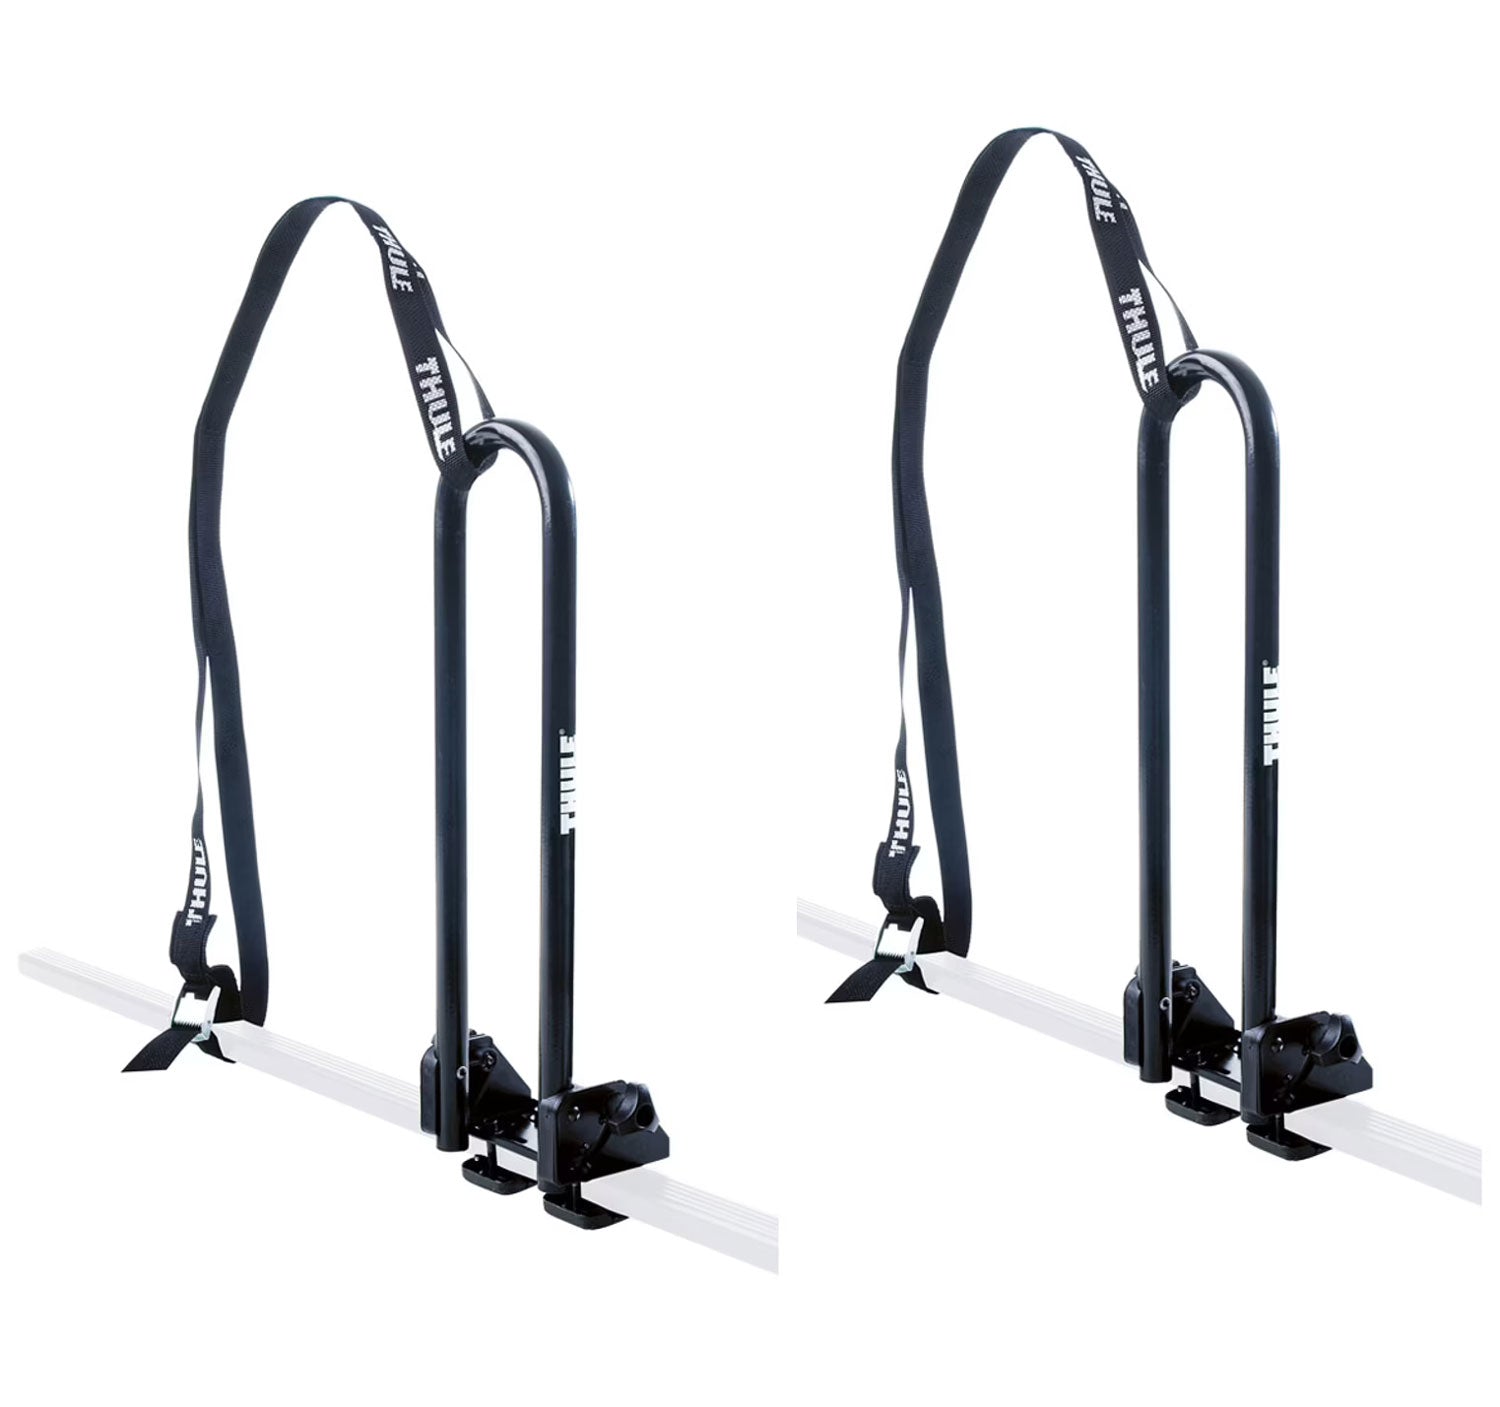 Thule Kayak Stacker using the included square bar adapters